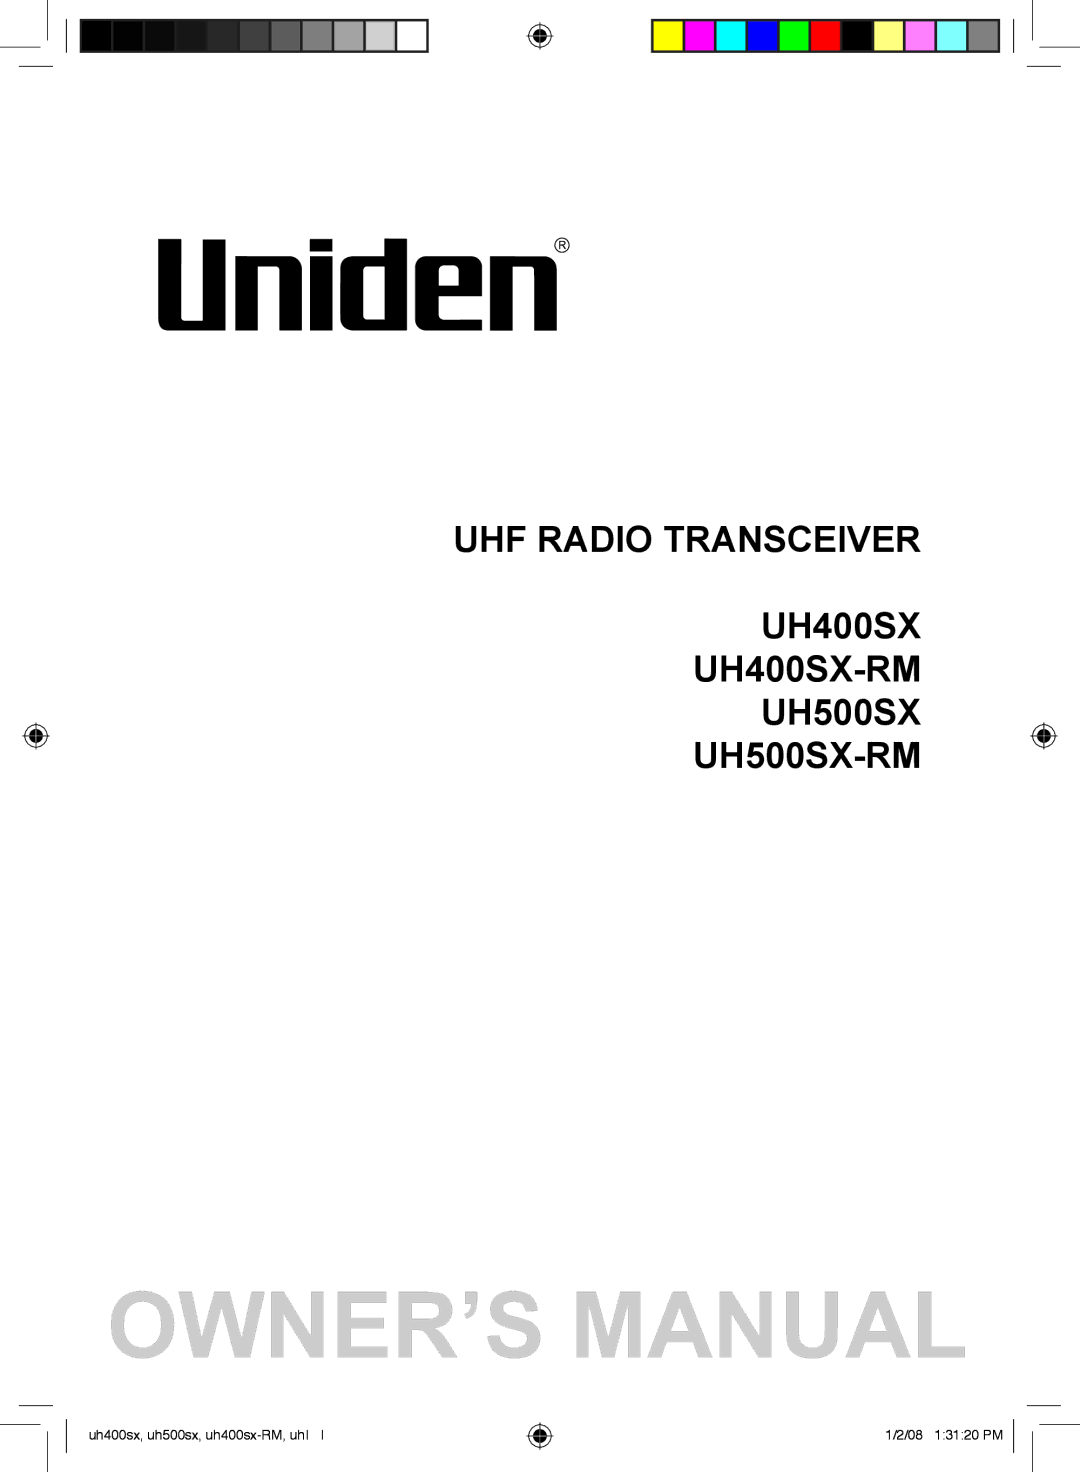 Uniden UH500SX-RM, UH400SX-RM owner manual OWNER’SI Manual 